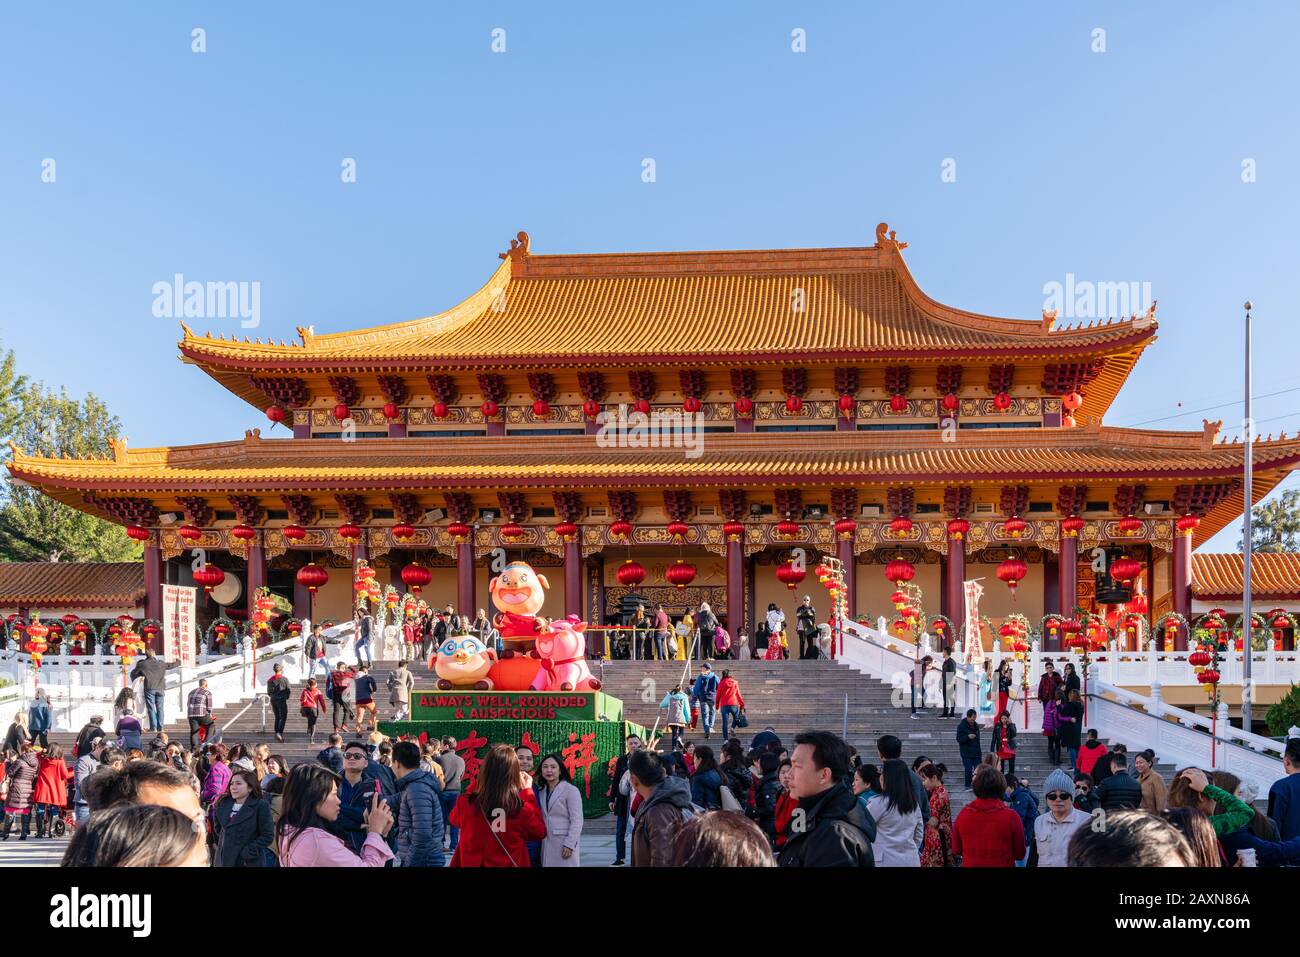 Celebrating Lunar New Year at Hsi Lai Buddhist Temple in San Gabriel Valley, California Stock Photo